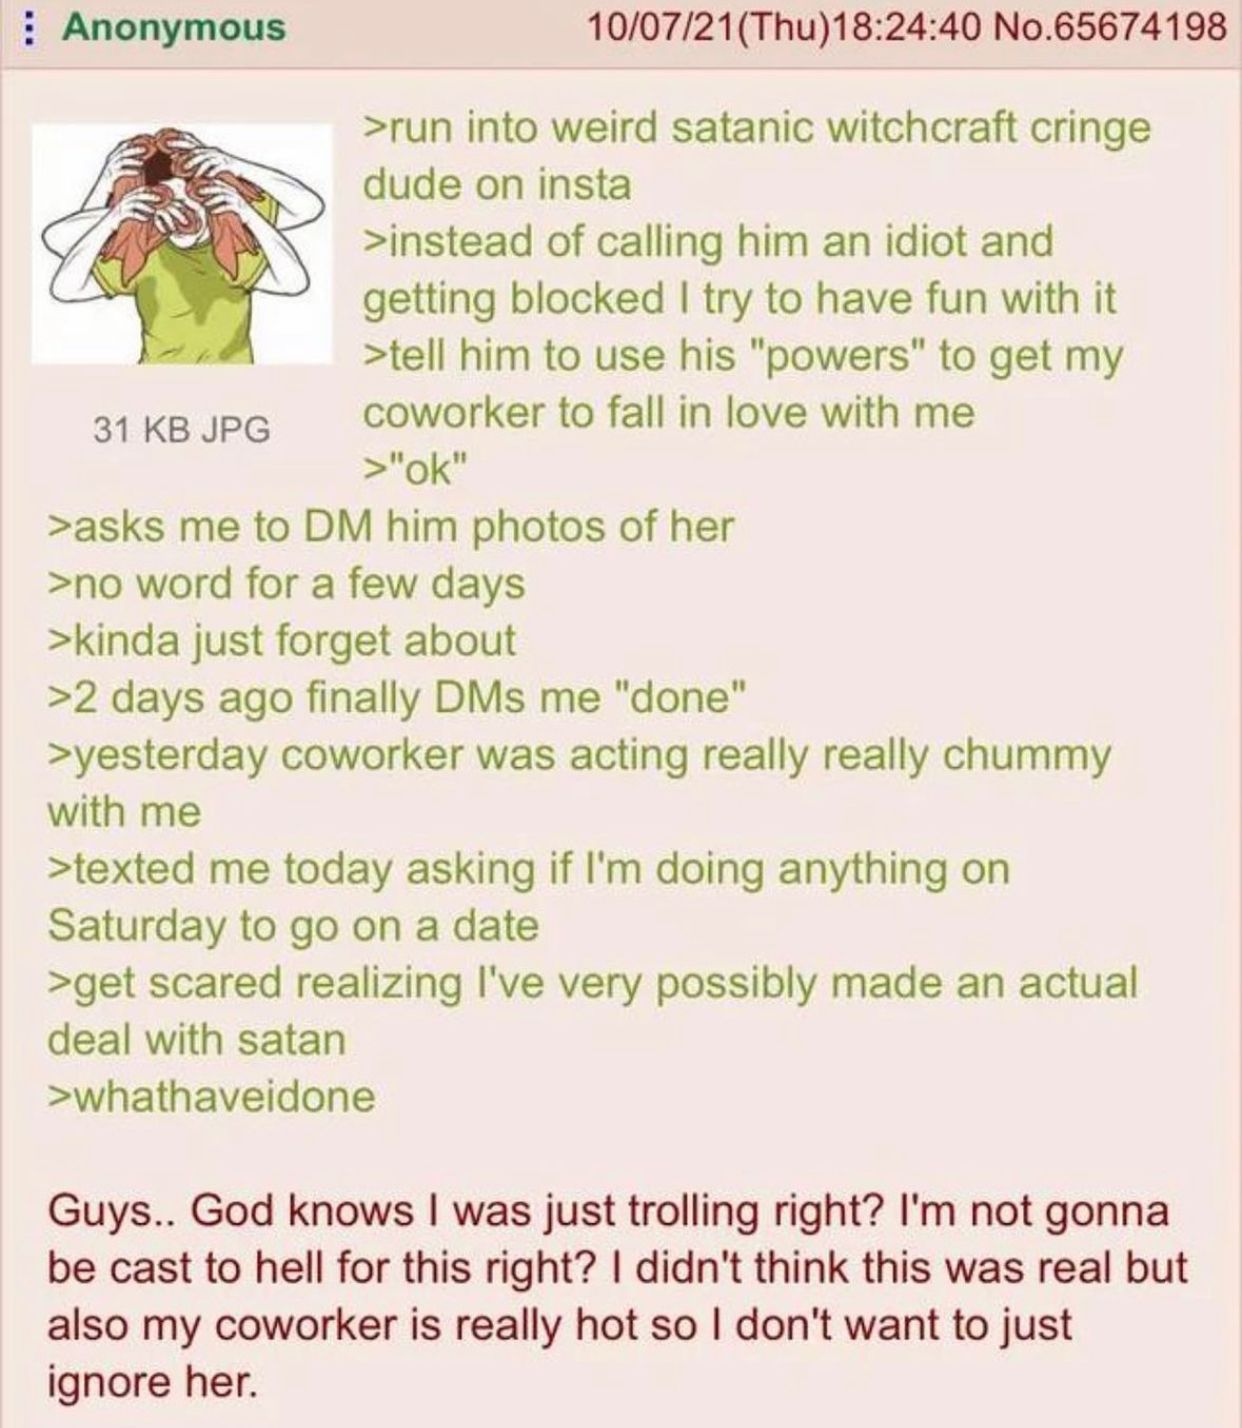 anon made a deal